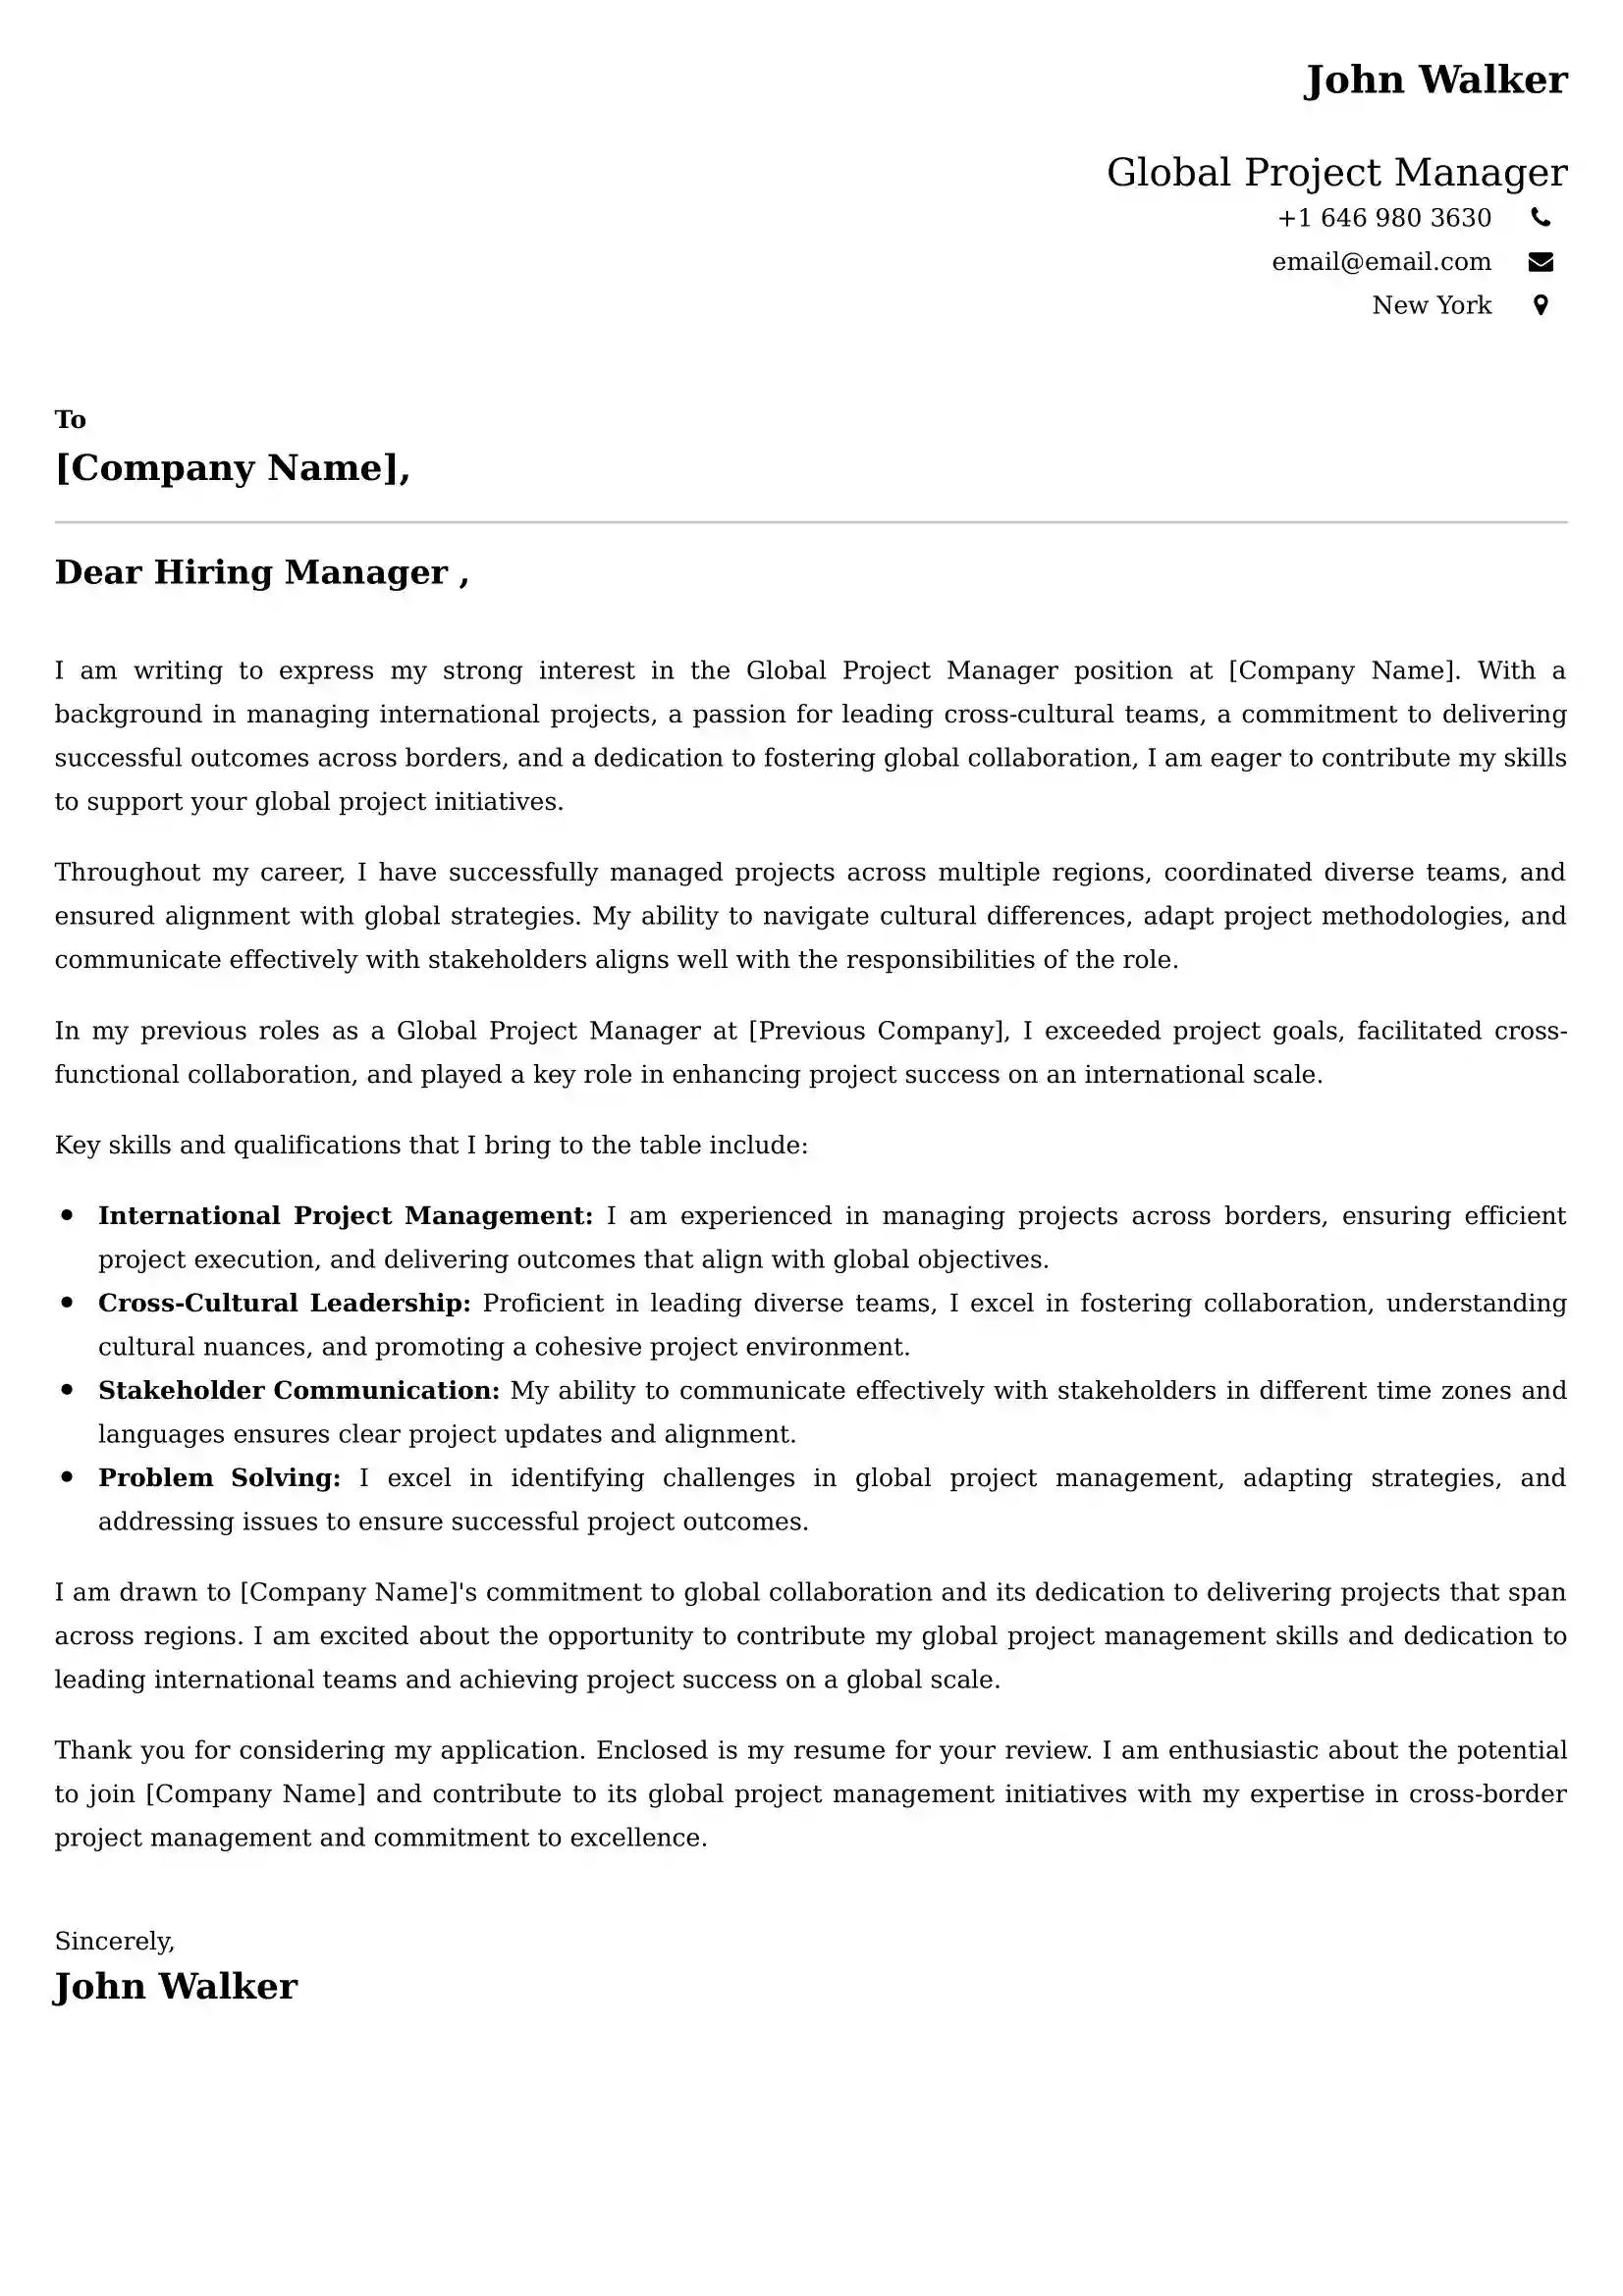 Global Project Manager Cover Letter Examples India